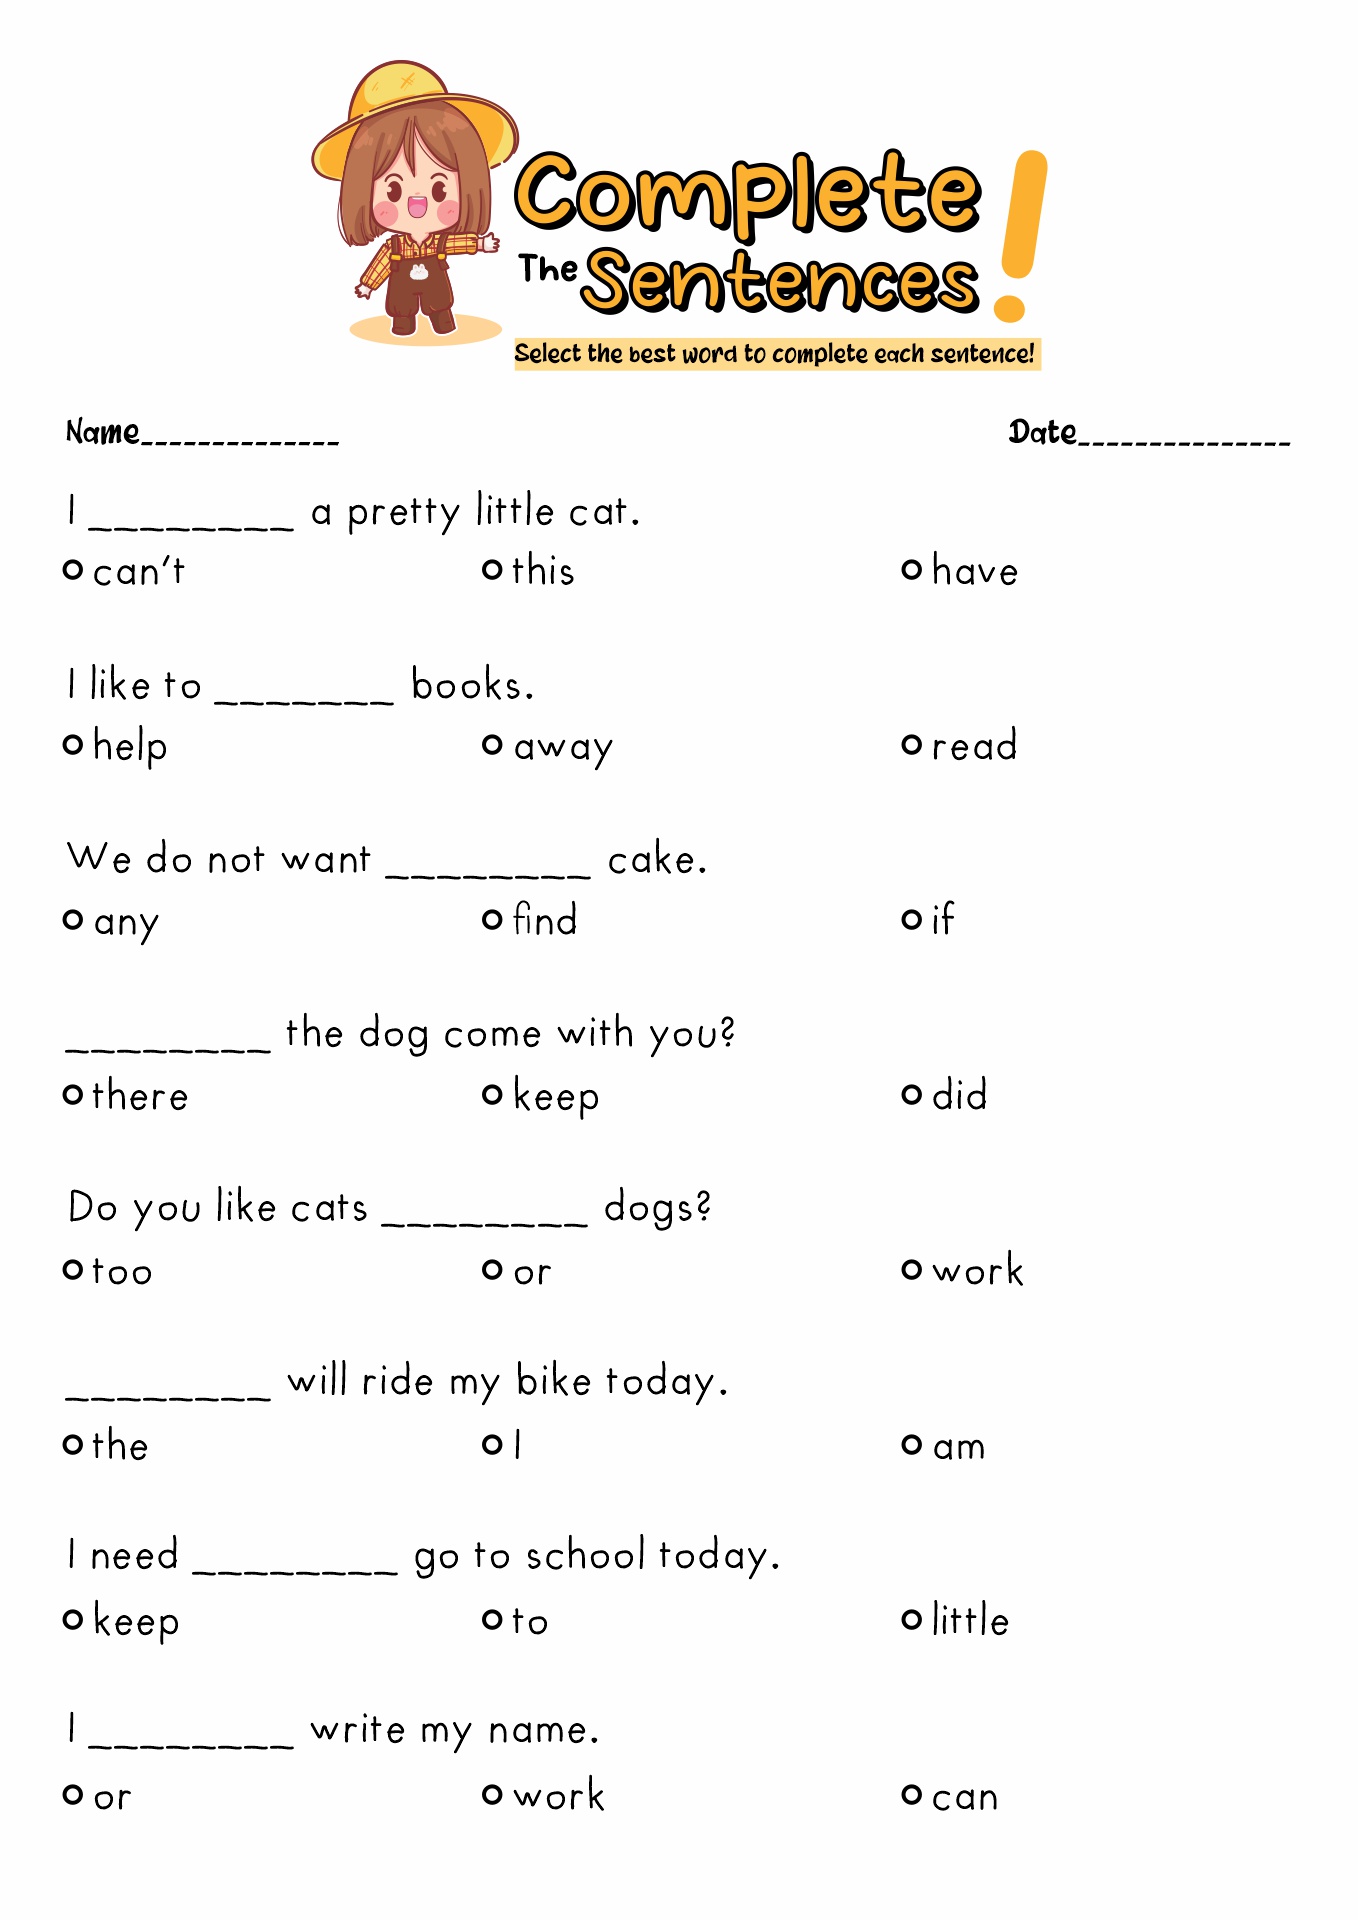 Simple Sentences with Sight Words Worksheets